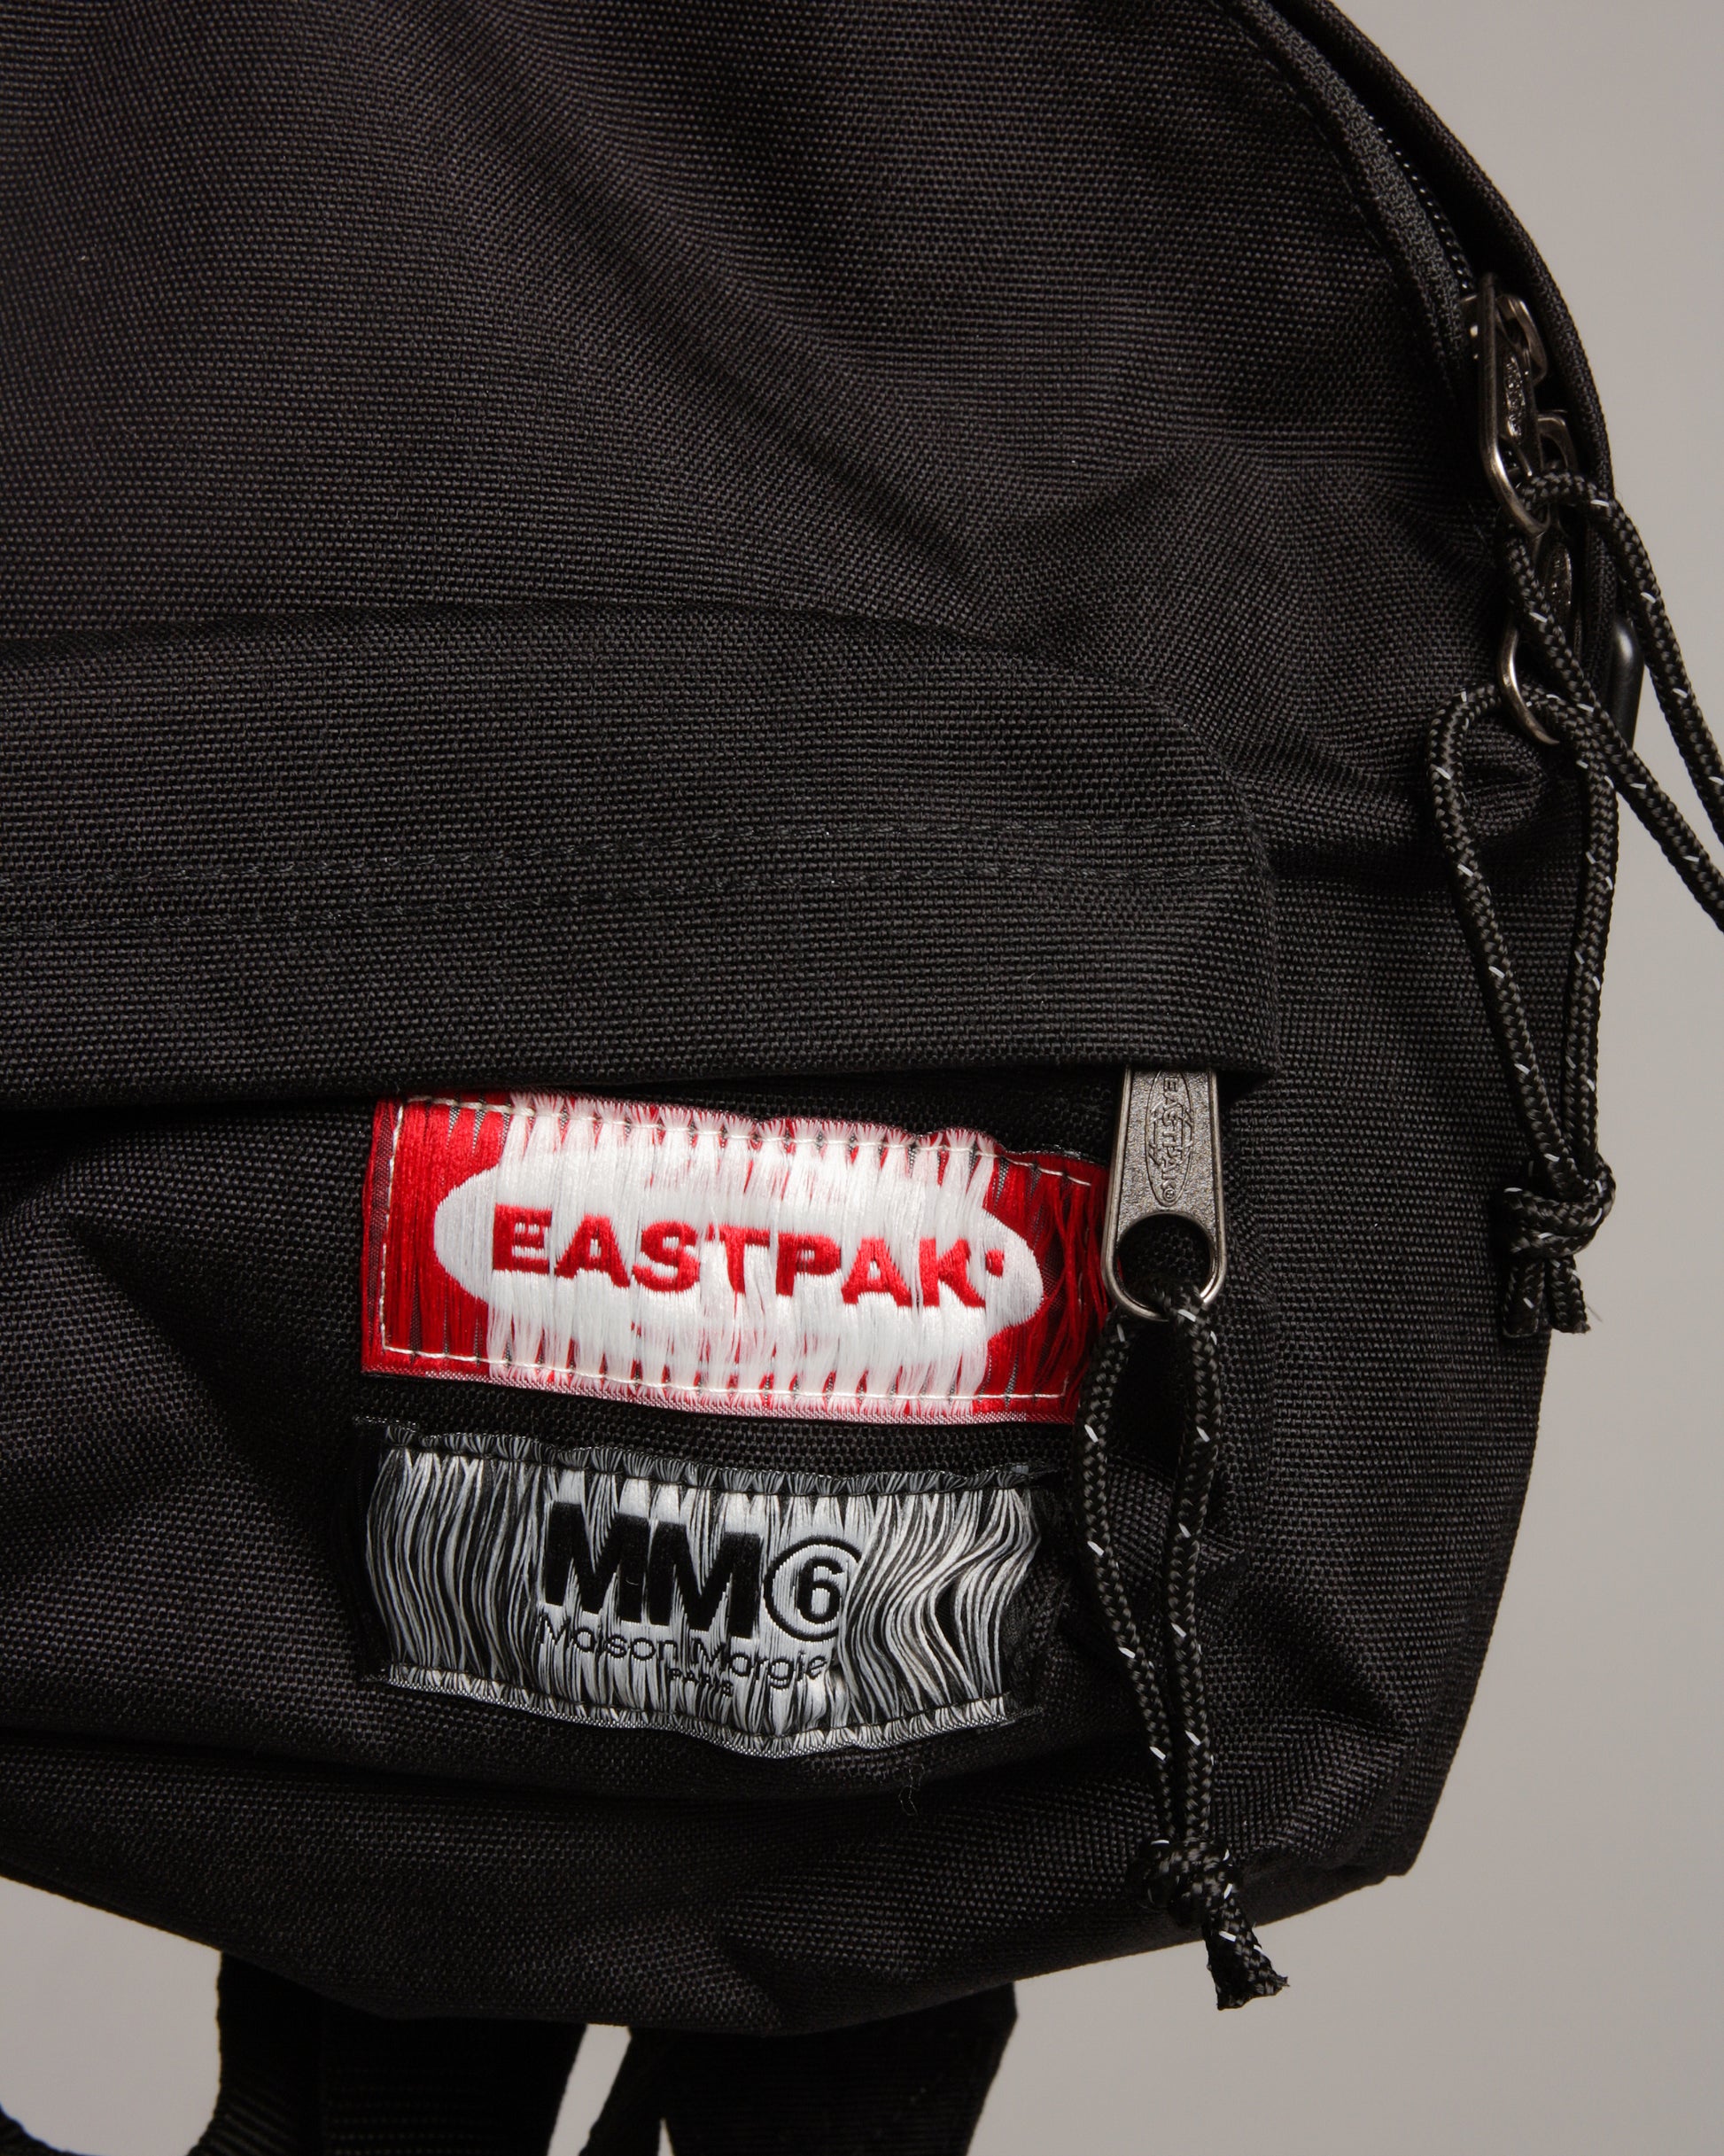 How to Choose a Backpack | Eastpak